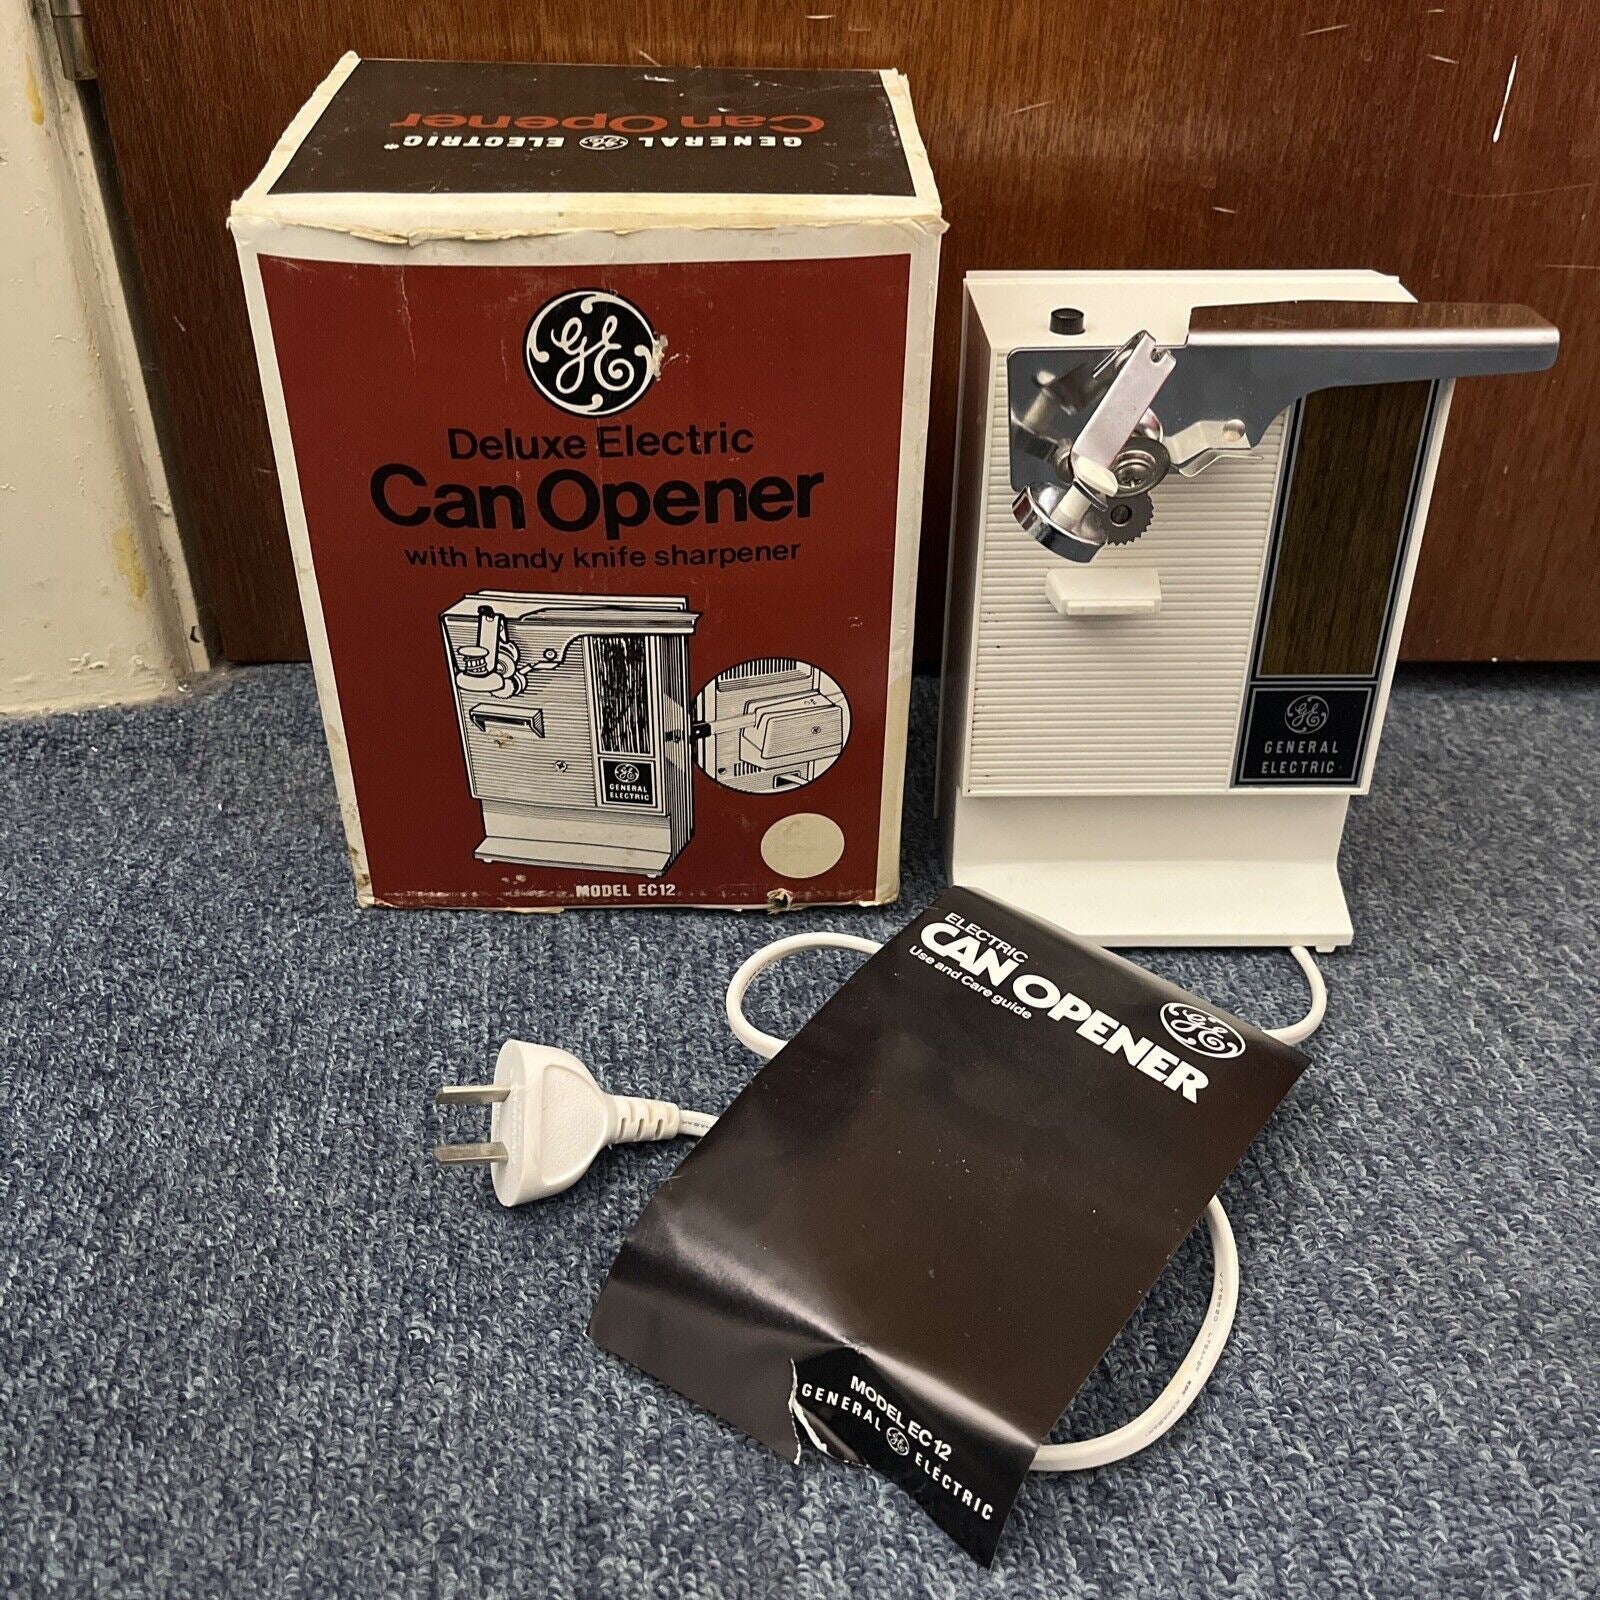 The GE electric can opener, helping Grandma open cans since 1969